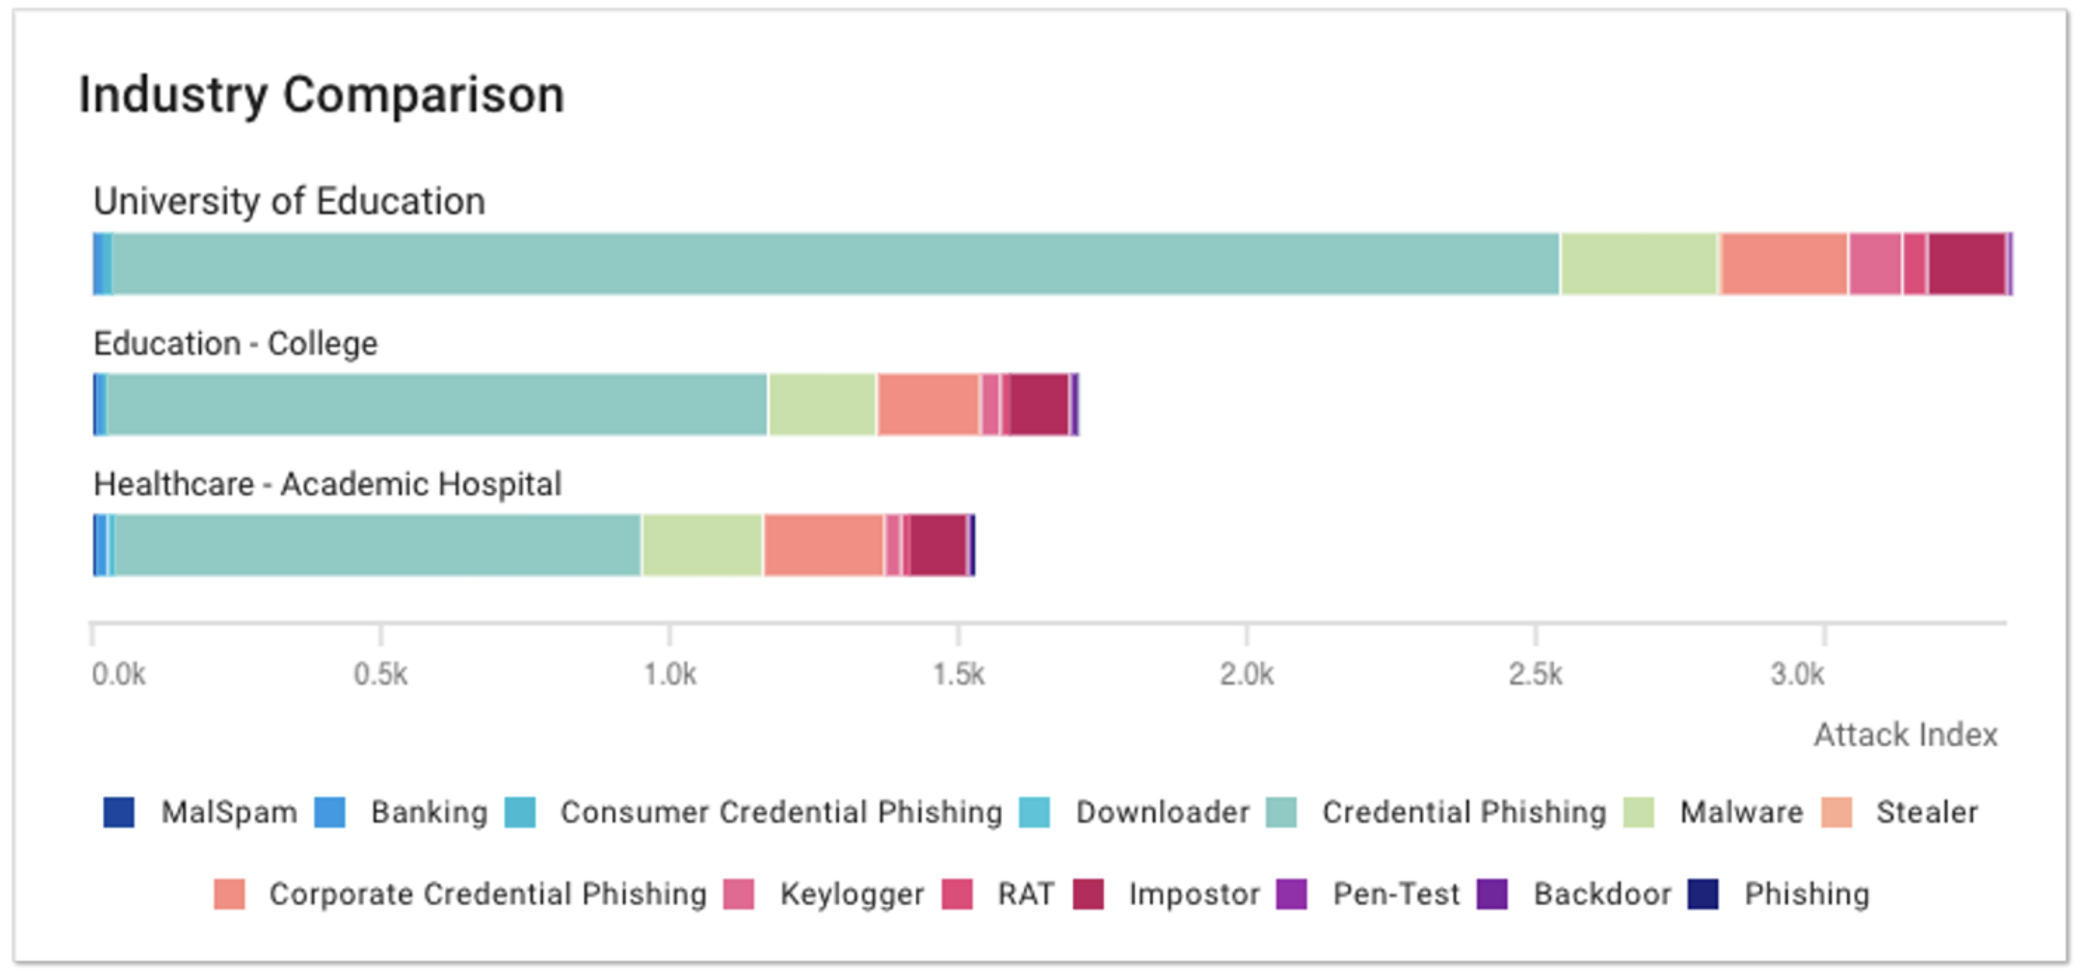 Industry Comparison Report Showing Threat Types and Severity